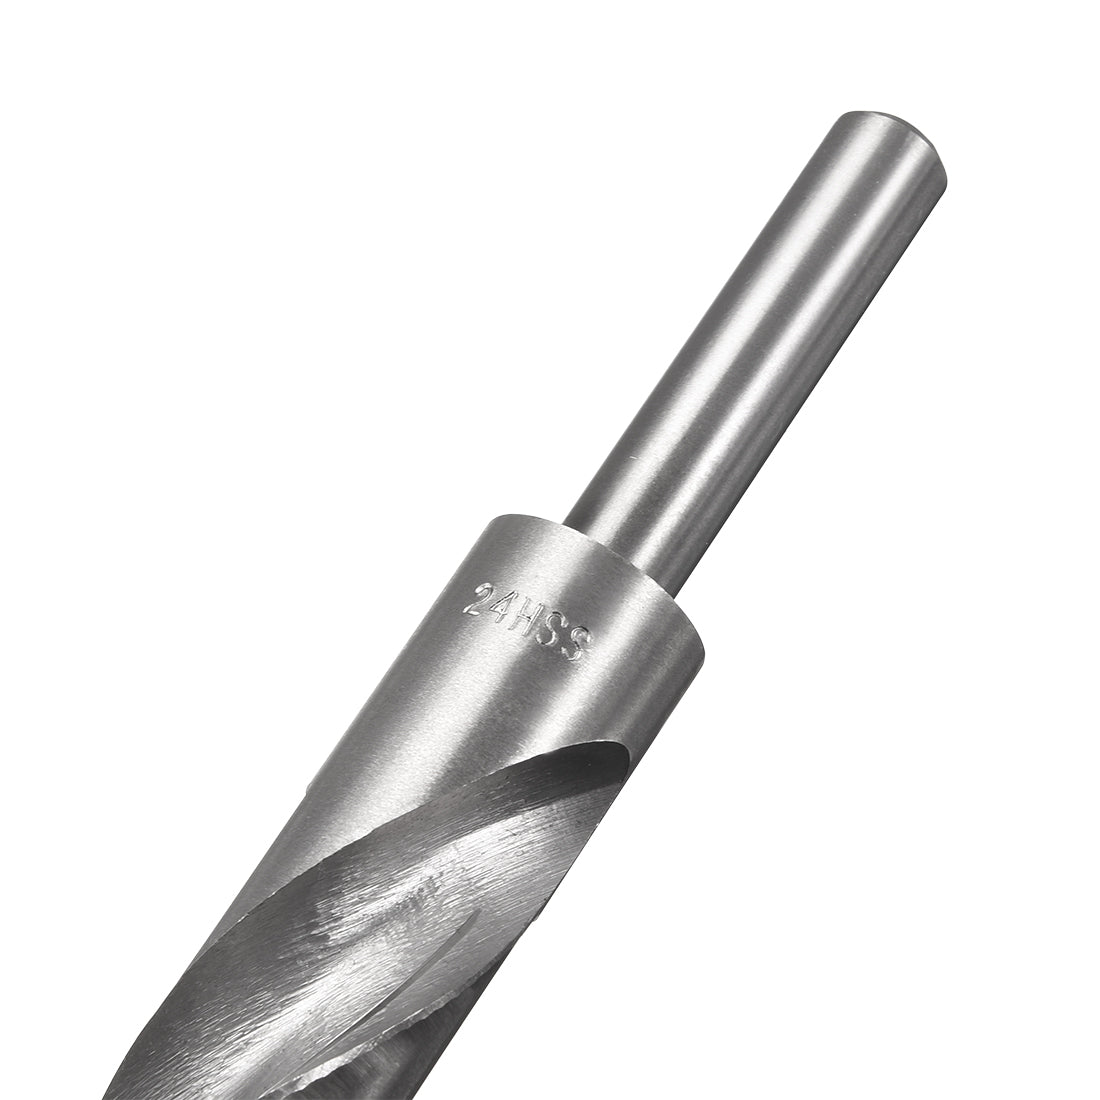 uxcell Uxcell 24mm Reduced Shank Drill Bit High Speed Steel 4241 with 1/2" Straight Shank